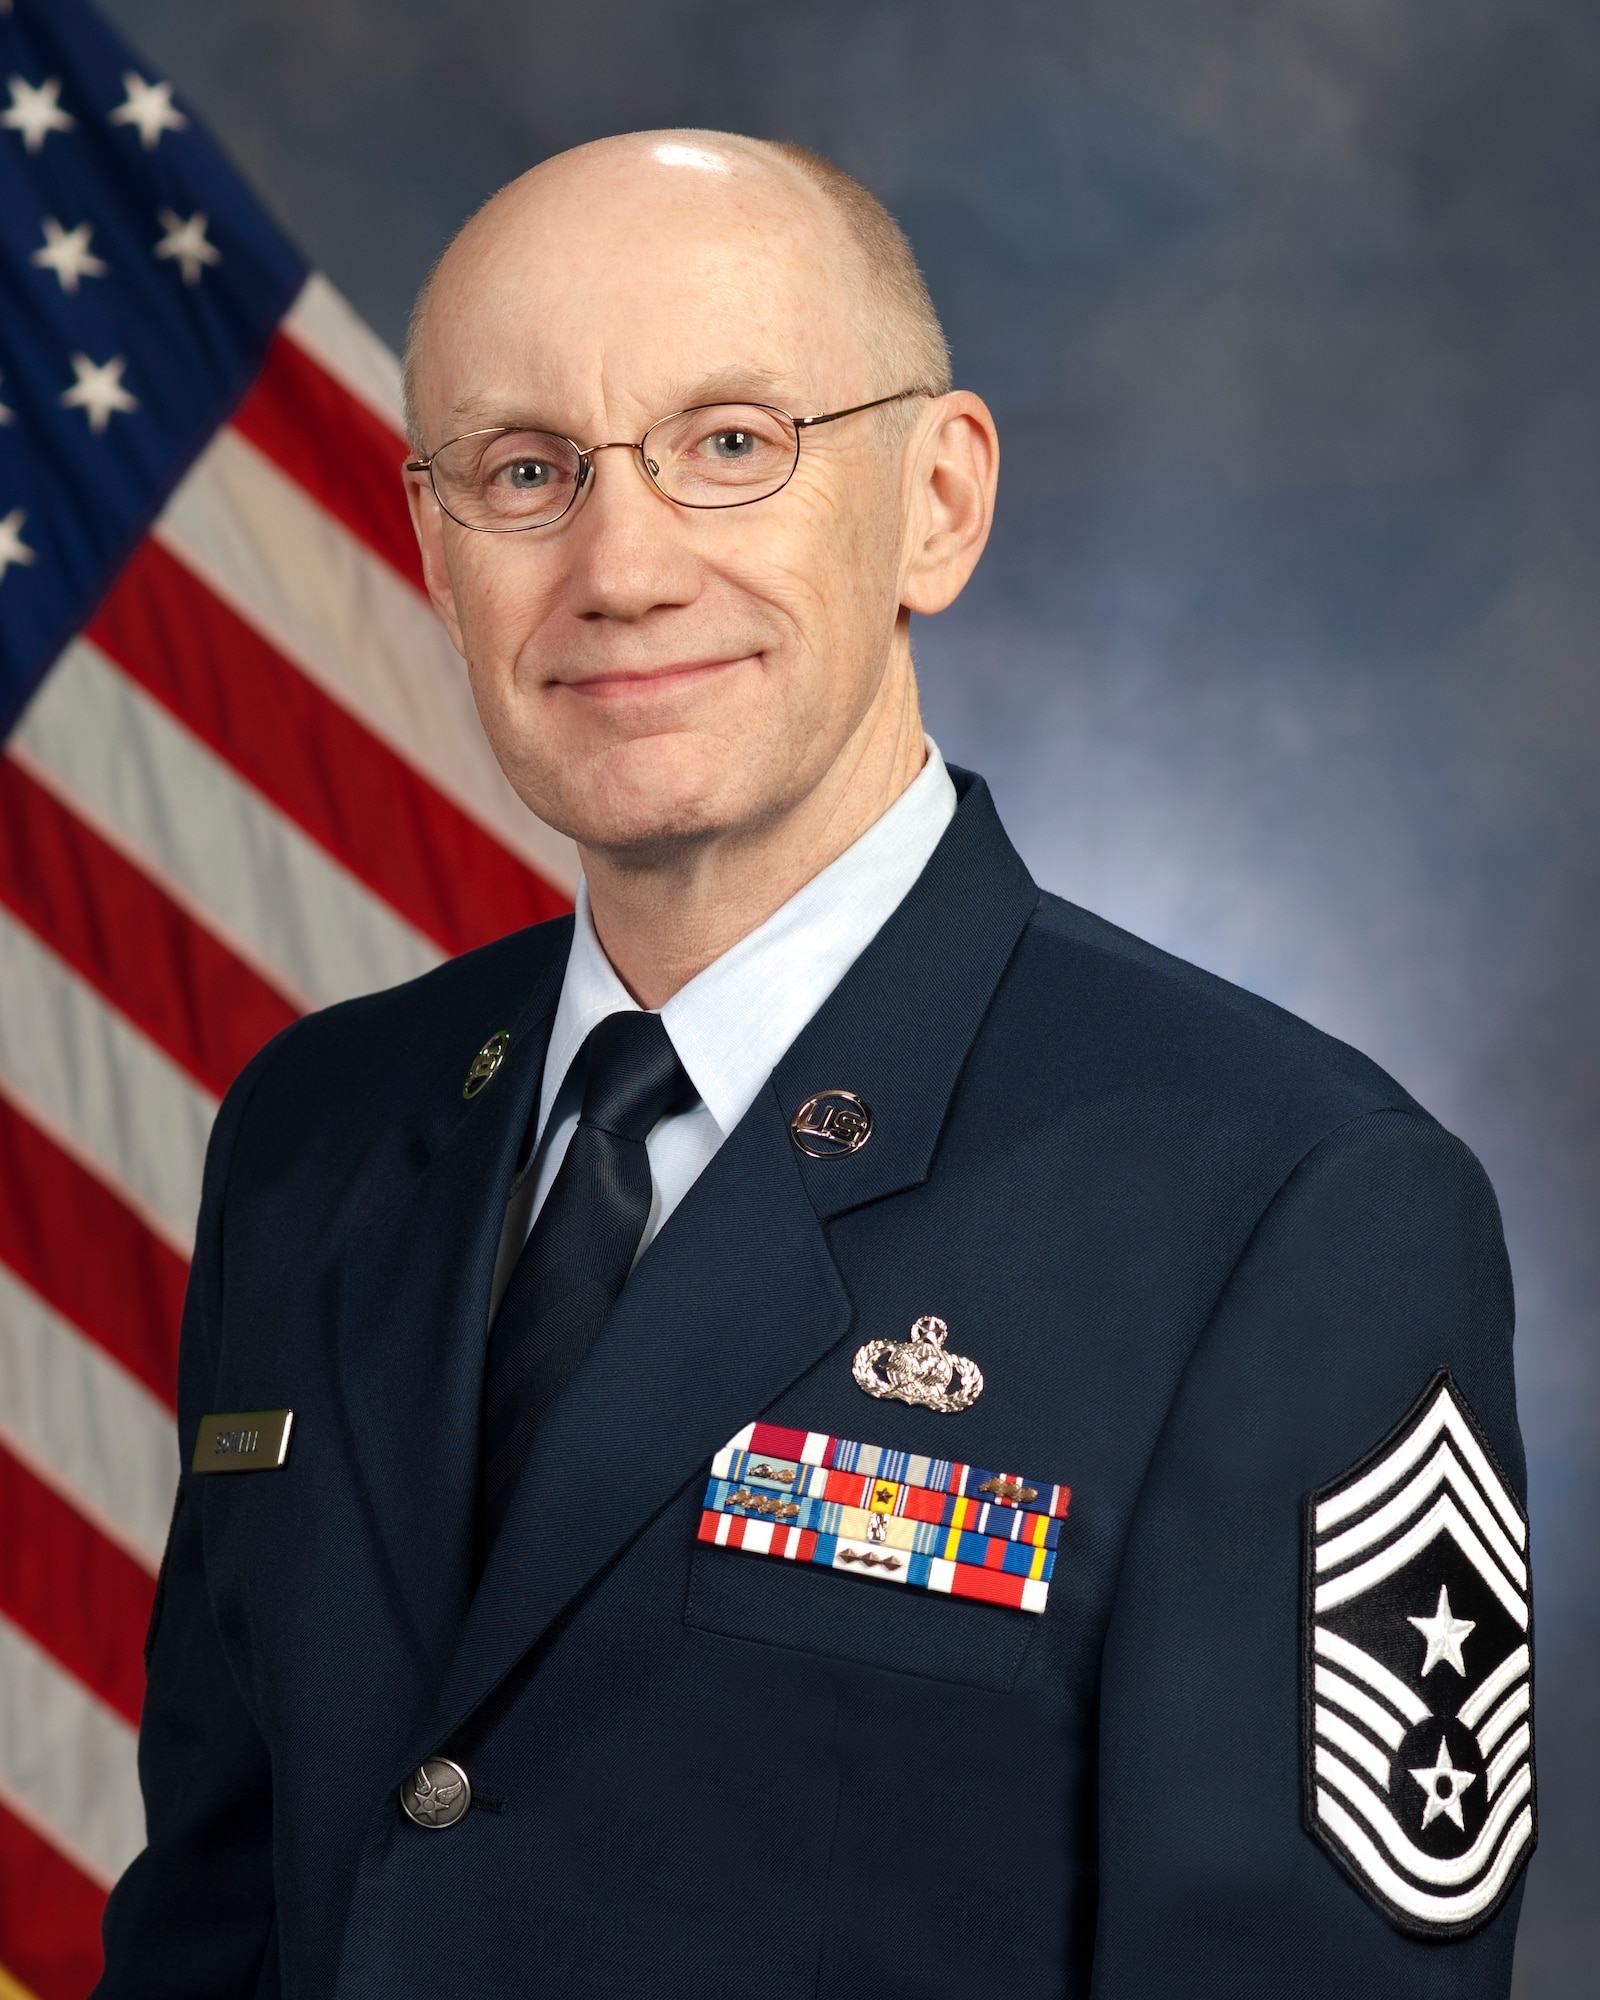 Command Chief Master Sgt. Ricky Sowell, Command Chief, 189th Airlift Wing.